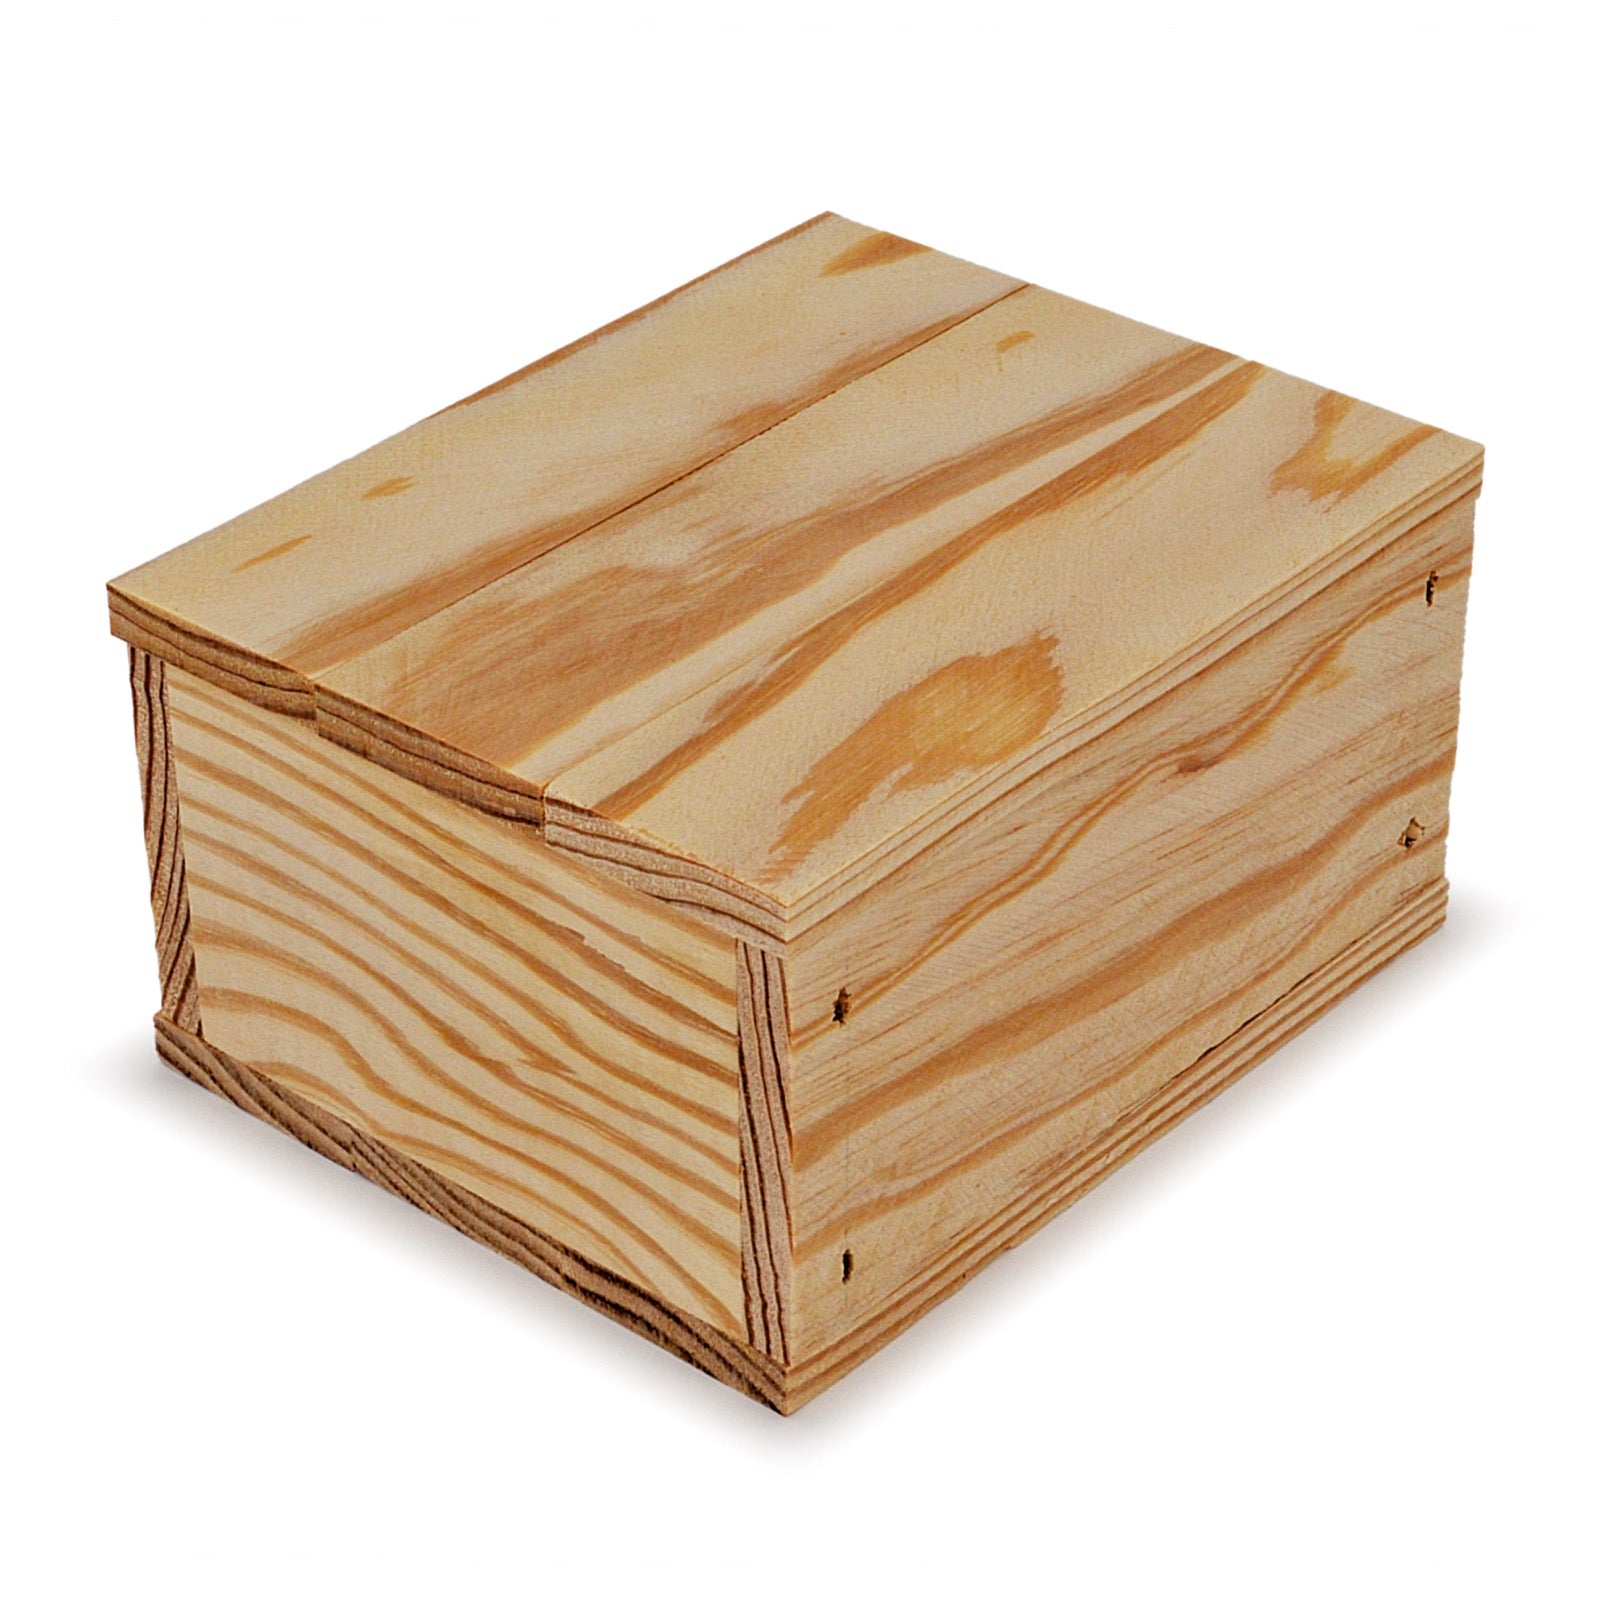 Small wooden crate with lid 5x4.5x2.75, 6-BX-5-4.5-2.75-NX-NW-LL, 12-BX-5-4.5-2.75-NX-NW-LL, 24-BX-5-4.5-2.75-NX-NW-LL, 48-BX-5-4.5-2.75-NX-NW-LL, 96-BX-5-4.5-2.75-NX-NW-LL